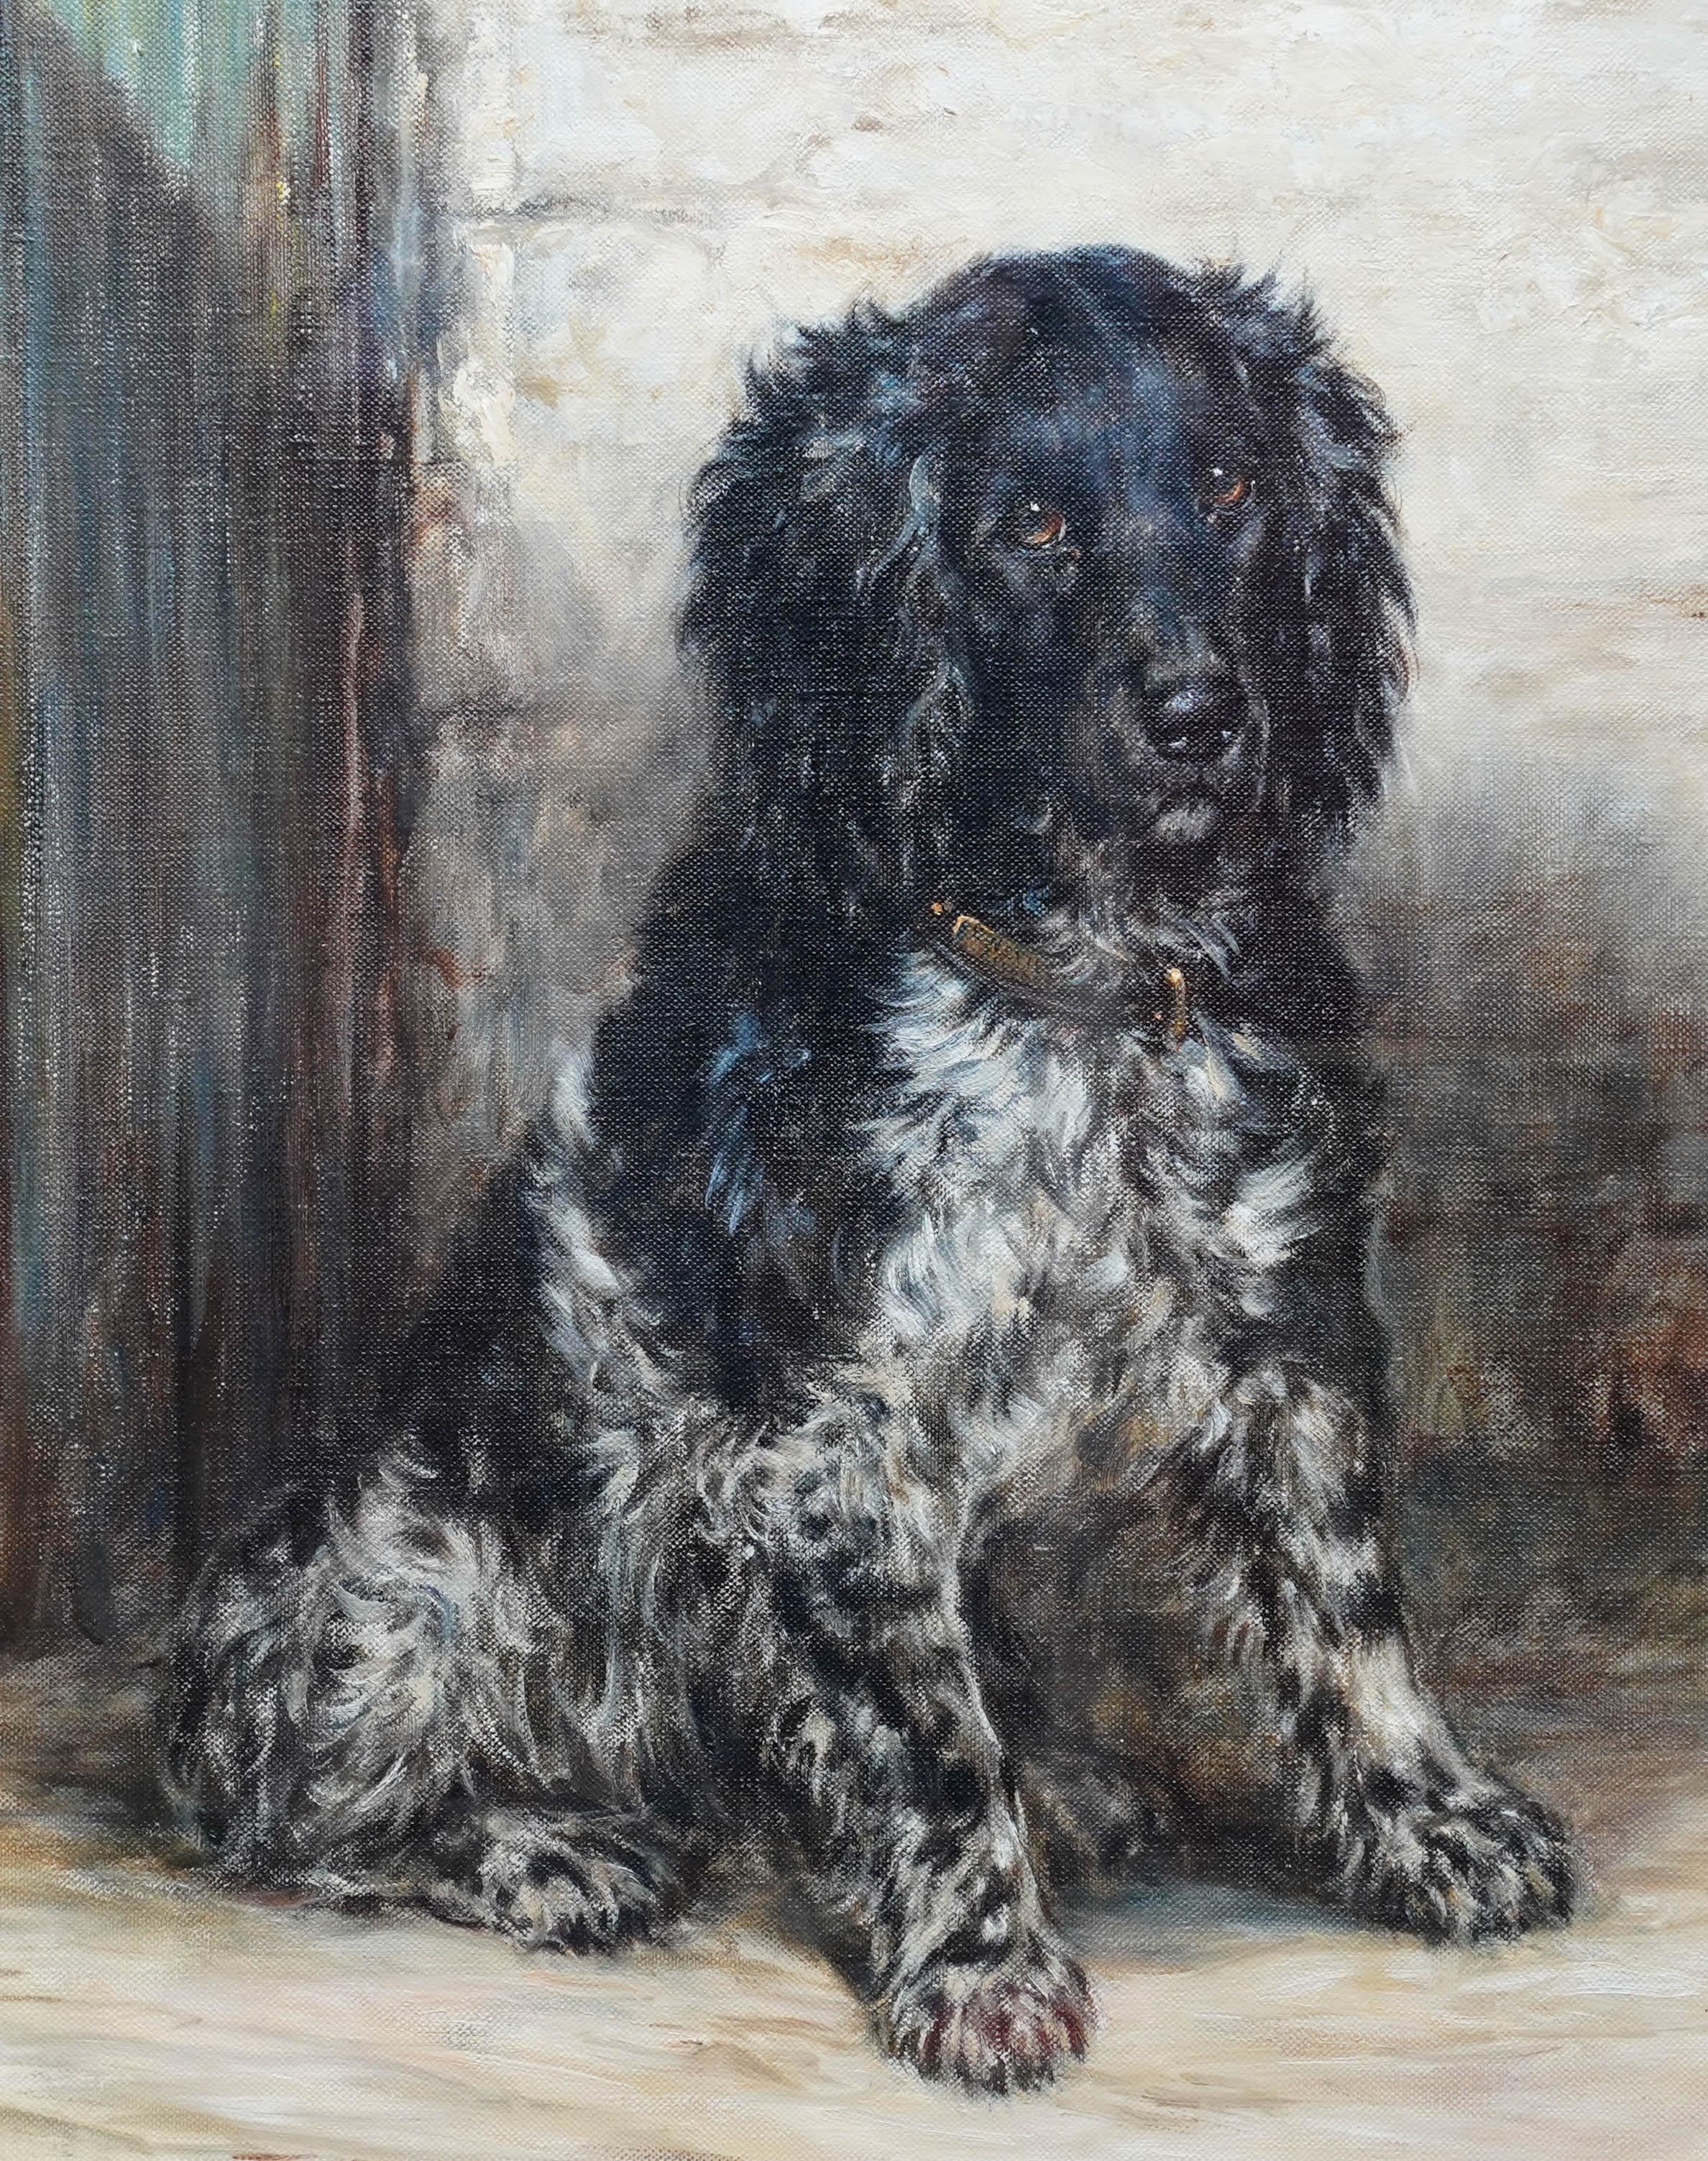 Portrait of a Spaniel - British Edwardian art dog portrait oil painting  - Realist Painting by Robert Morley